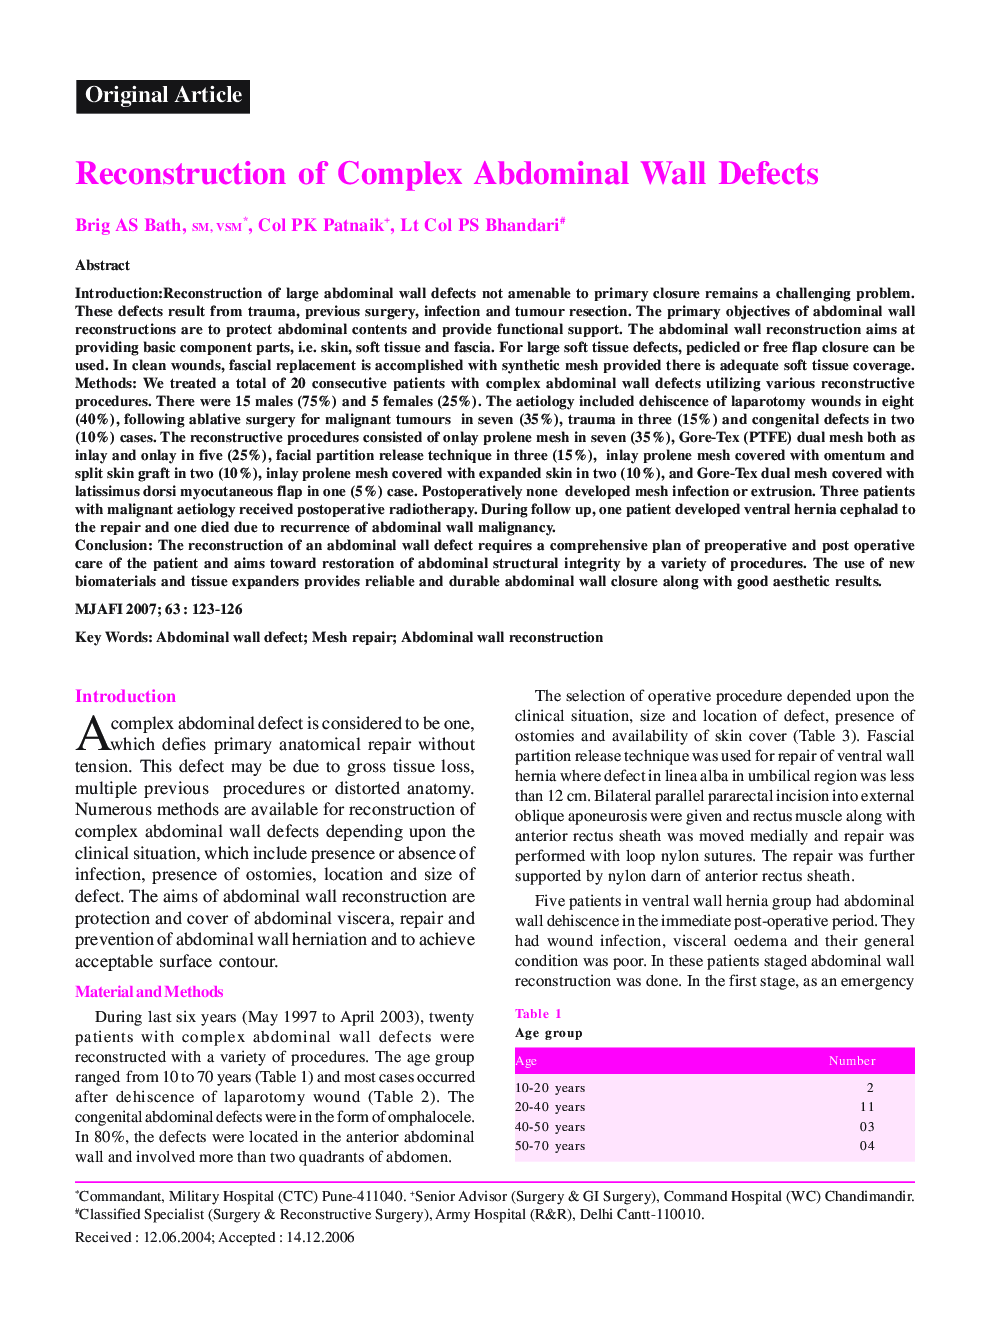 Reconstruction of Complex Abdominal Wall Defects